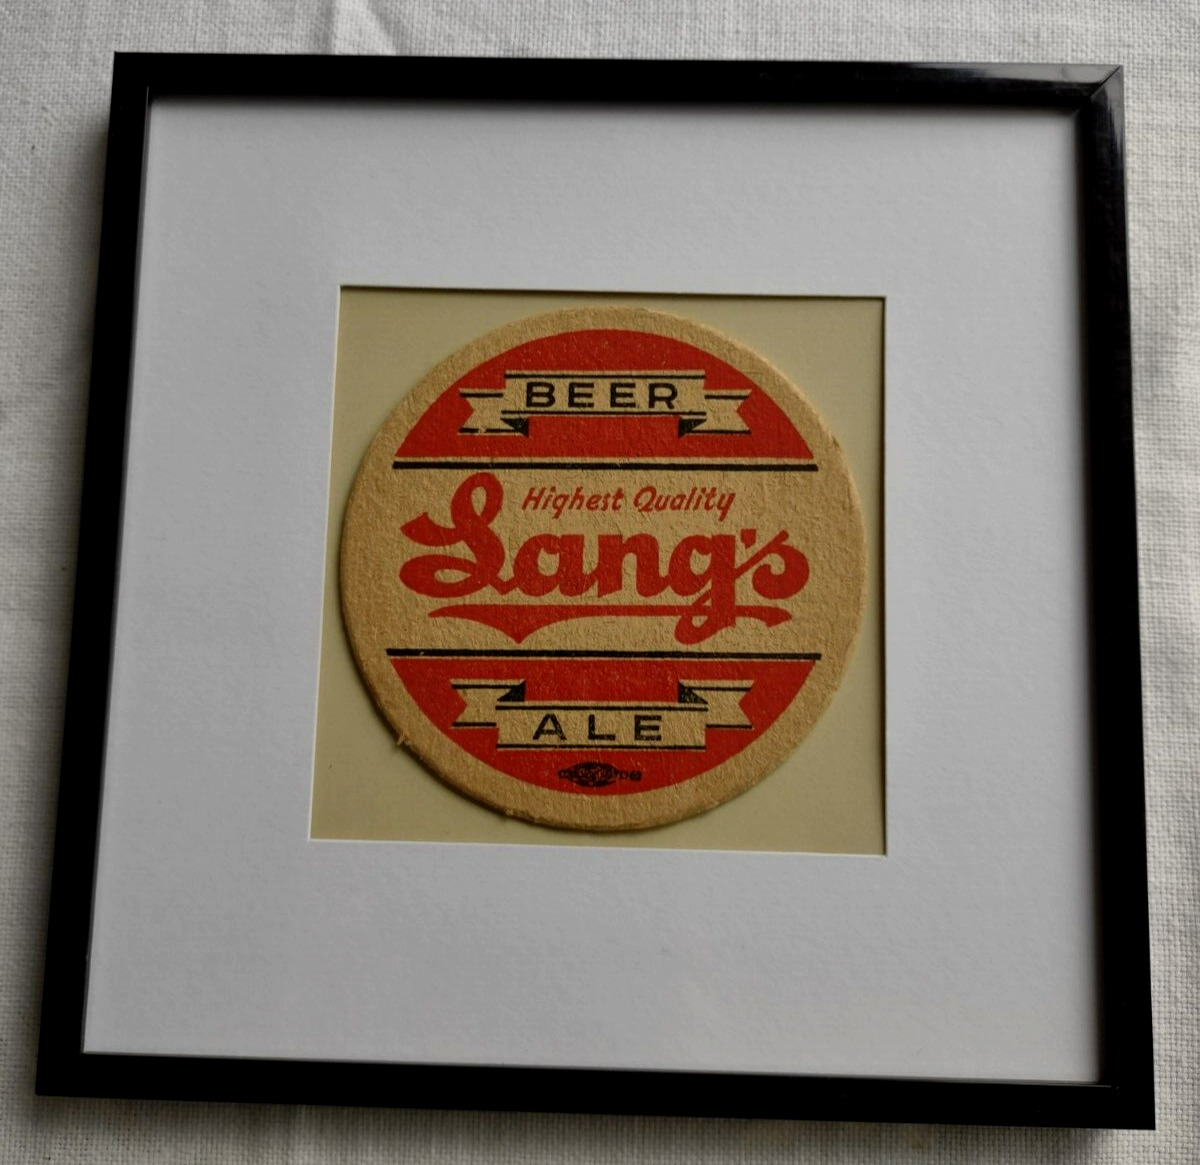 Vintage Lang's Brewery Beer & Ale Buffalo NY Matted Framed Coaster